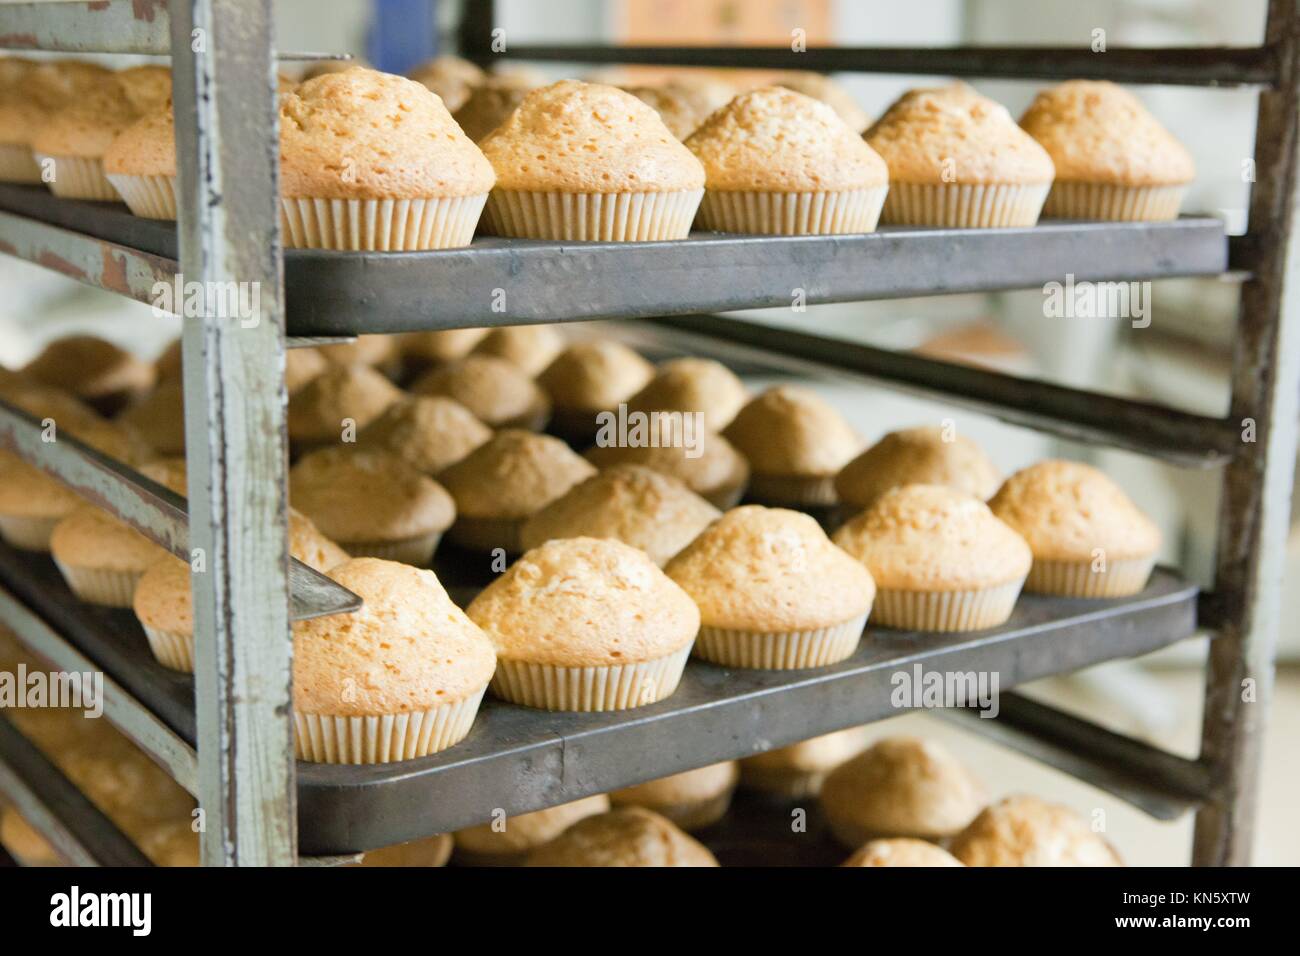 Shelves for trays with product just baked. Handmade manufacturing process of spanish madeleines. Stock Photo